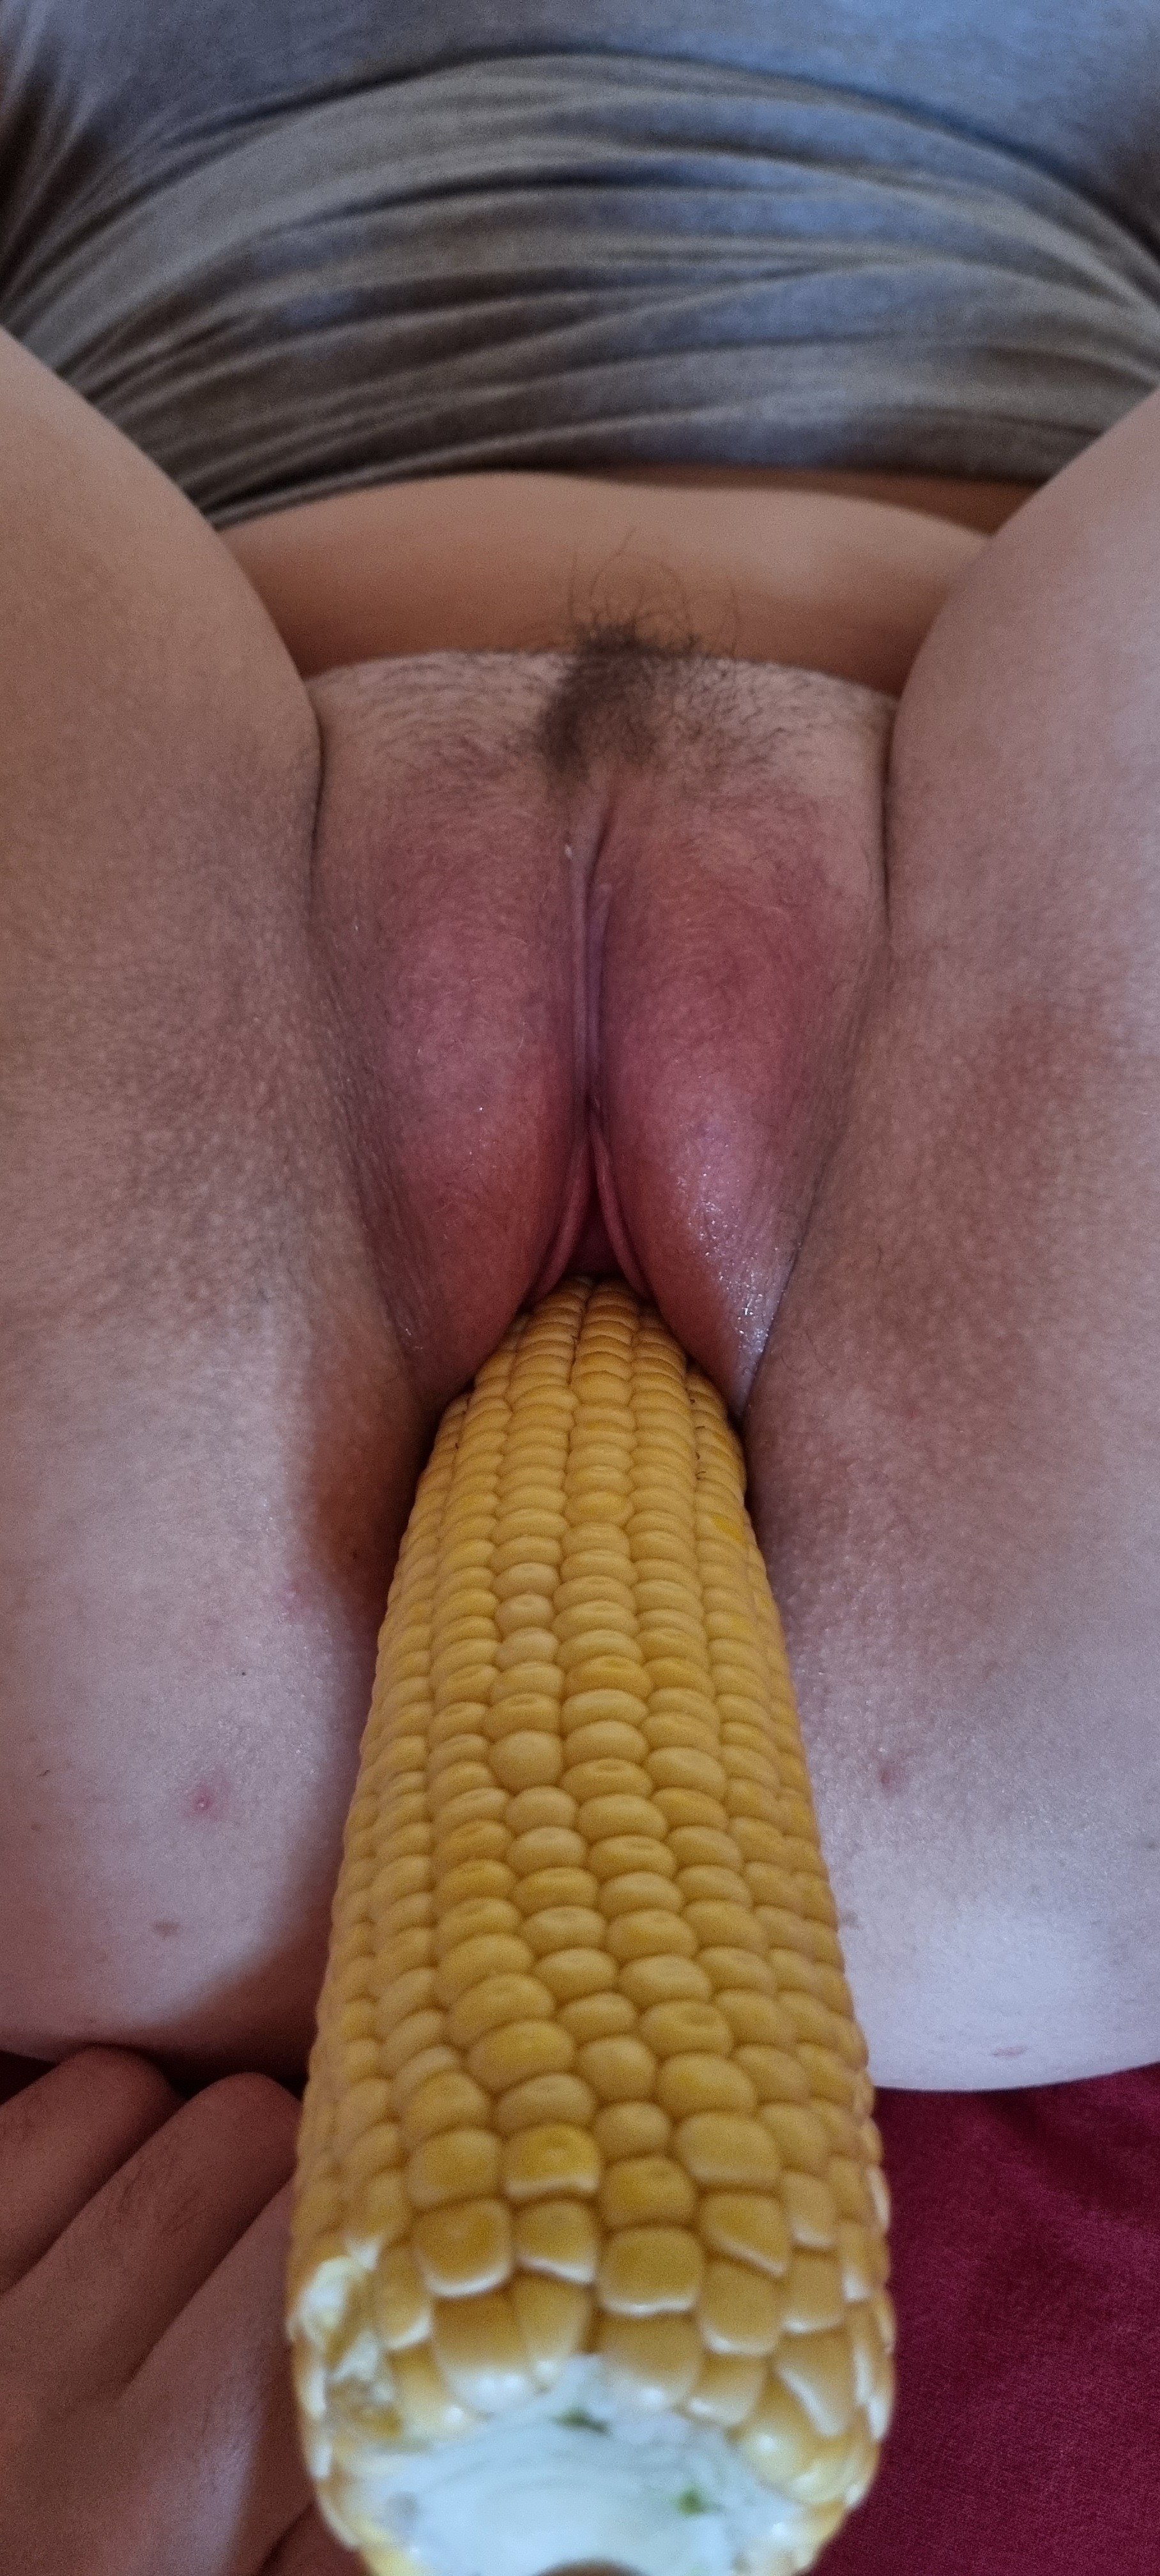 deanthony jackson add photo corn cob in pussy